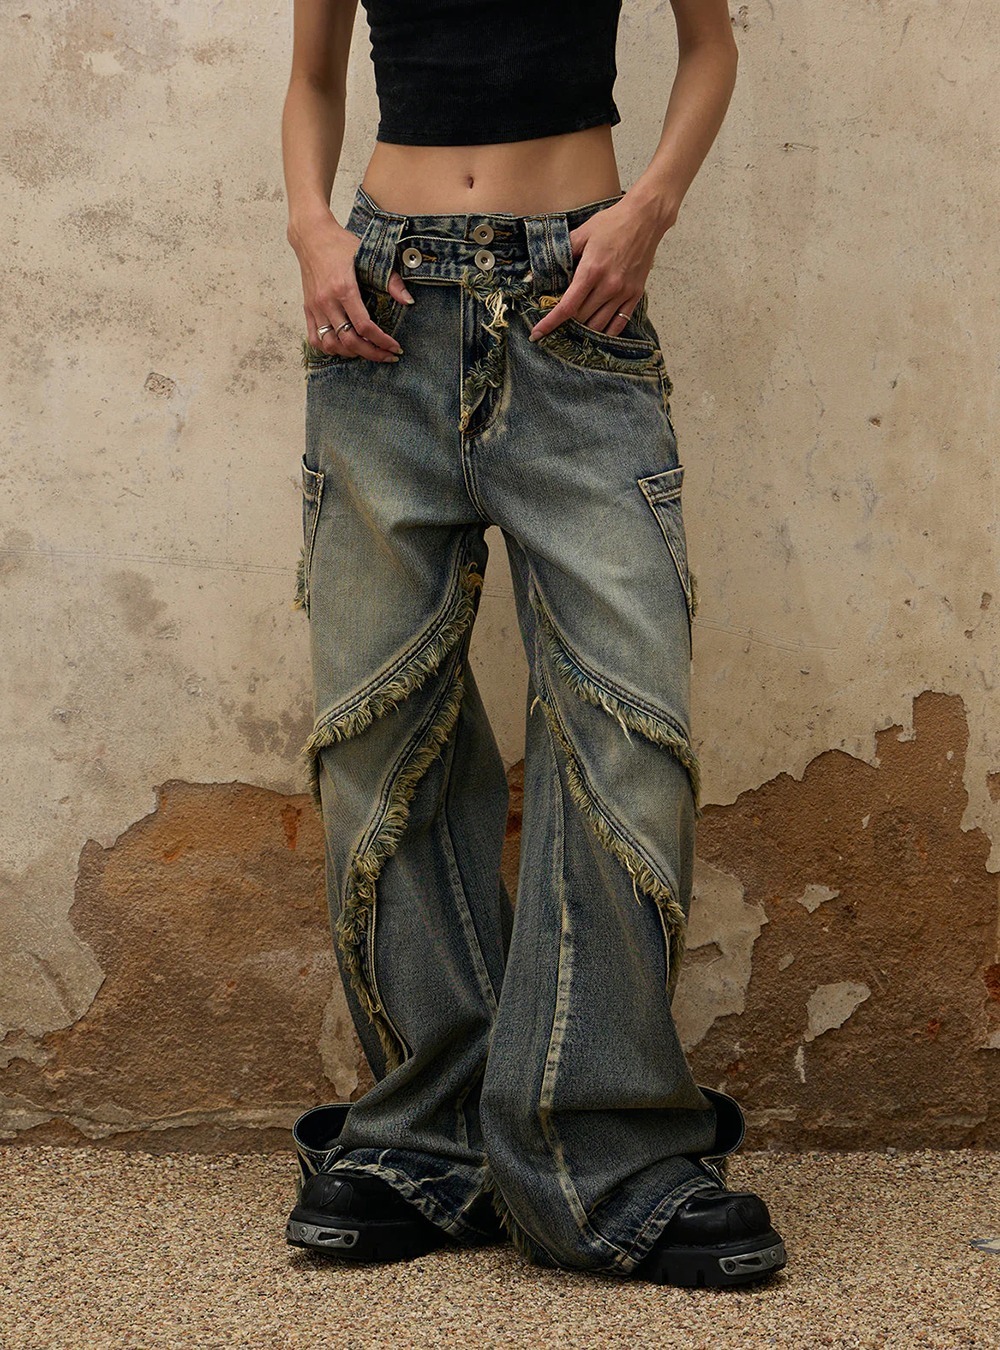 Personsoul Alien dirty Denim jeans ジーパン - tracemed.com.br